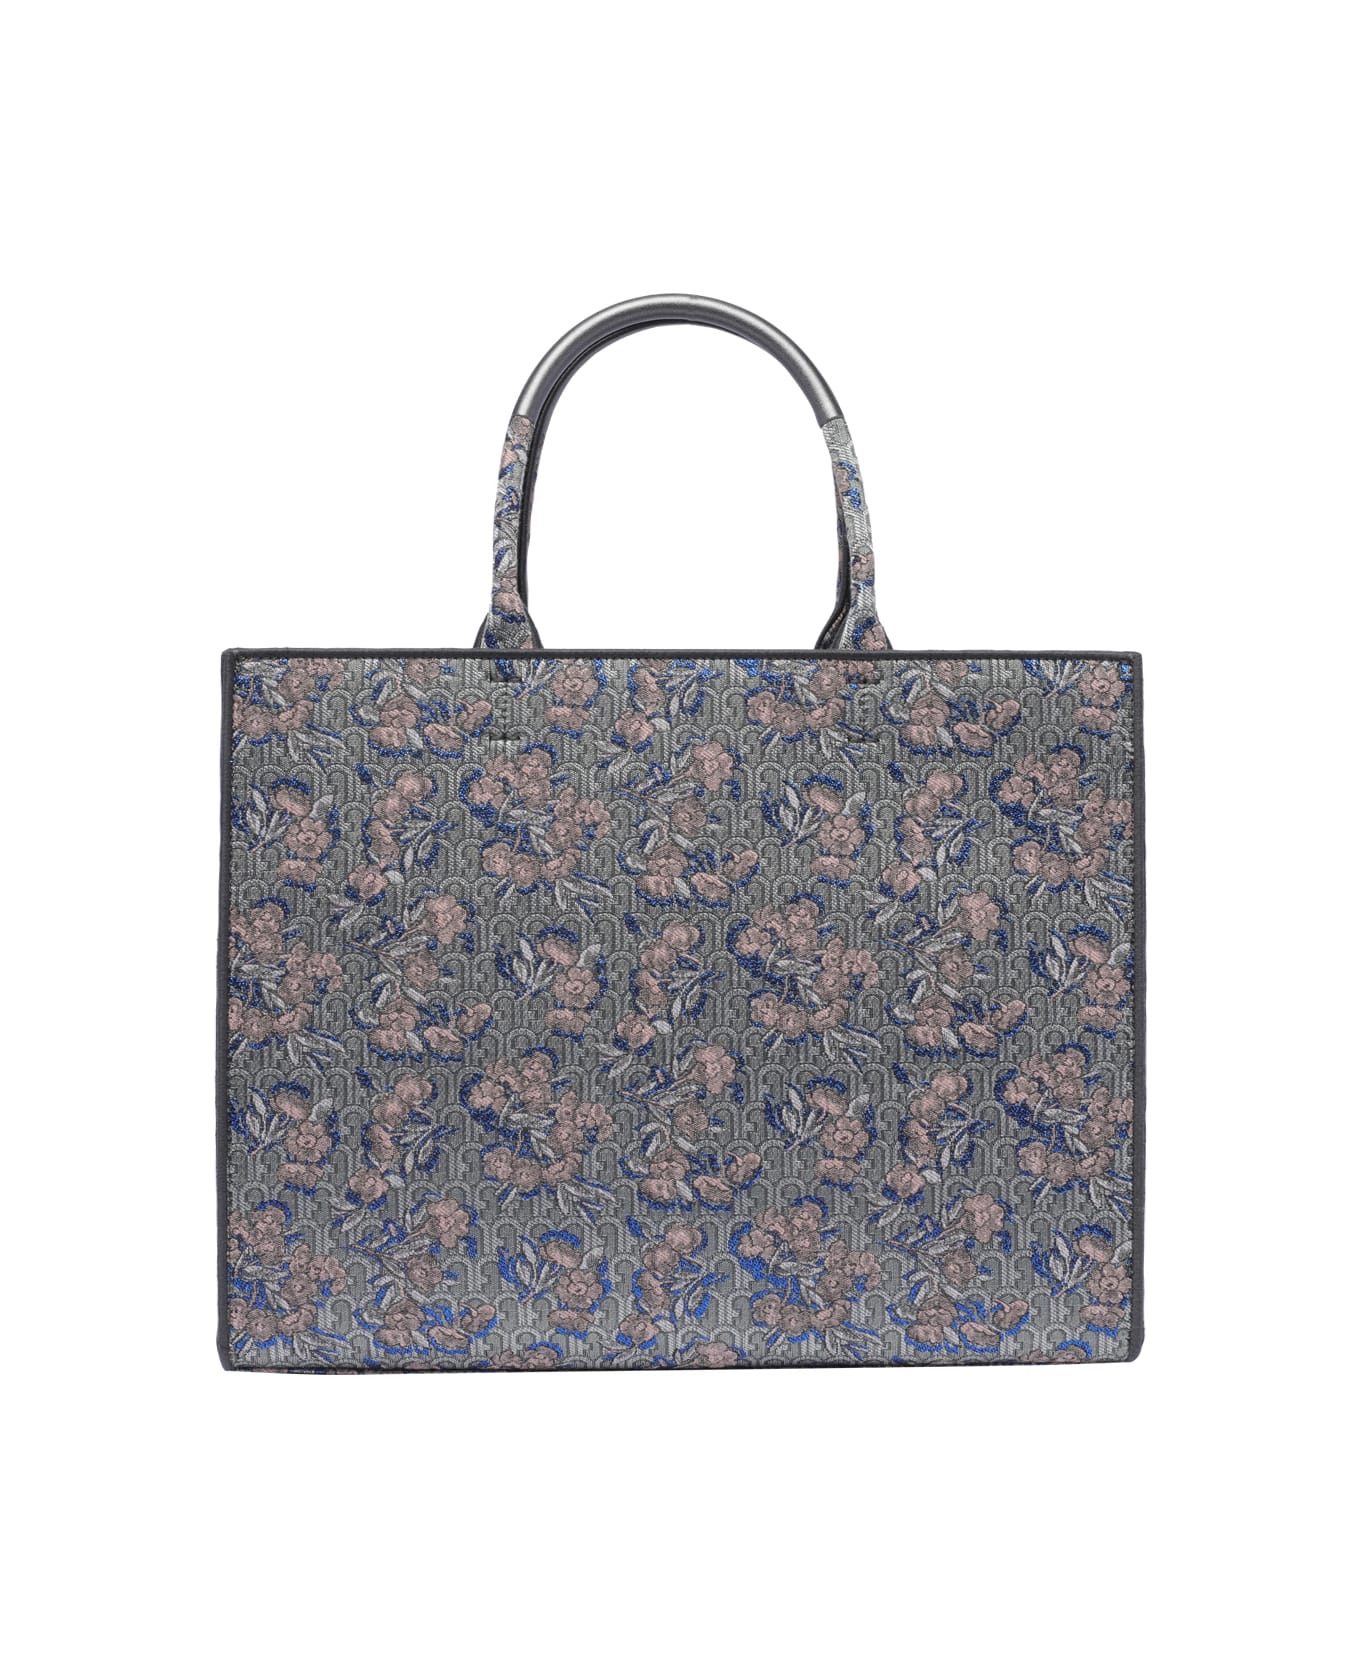 Furla Opportunity Shopping Bag - Toni Color Silver トートバッグ